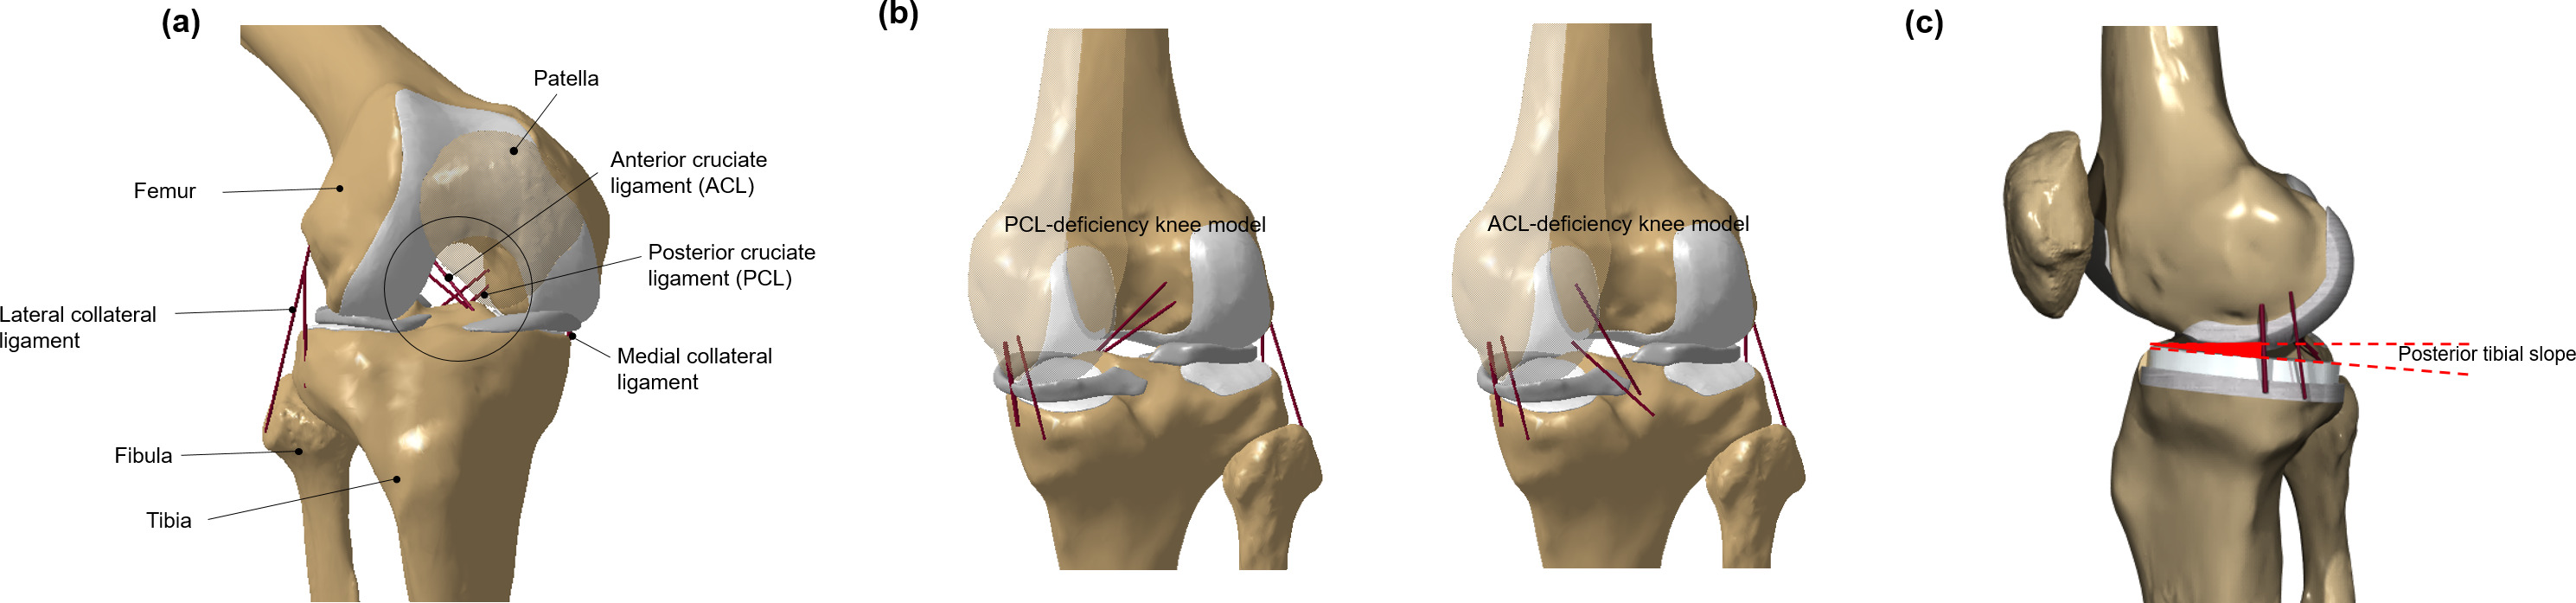 Fig. 1 
            Finite element models in analysis for a) intact, b) anterior cruciate ligament (ACL) deficiency and posterior cruciate ligament (PCL) deficiency, and c) unicompartmental knee arthroplasty (UKA) model.
          